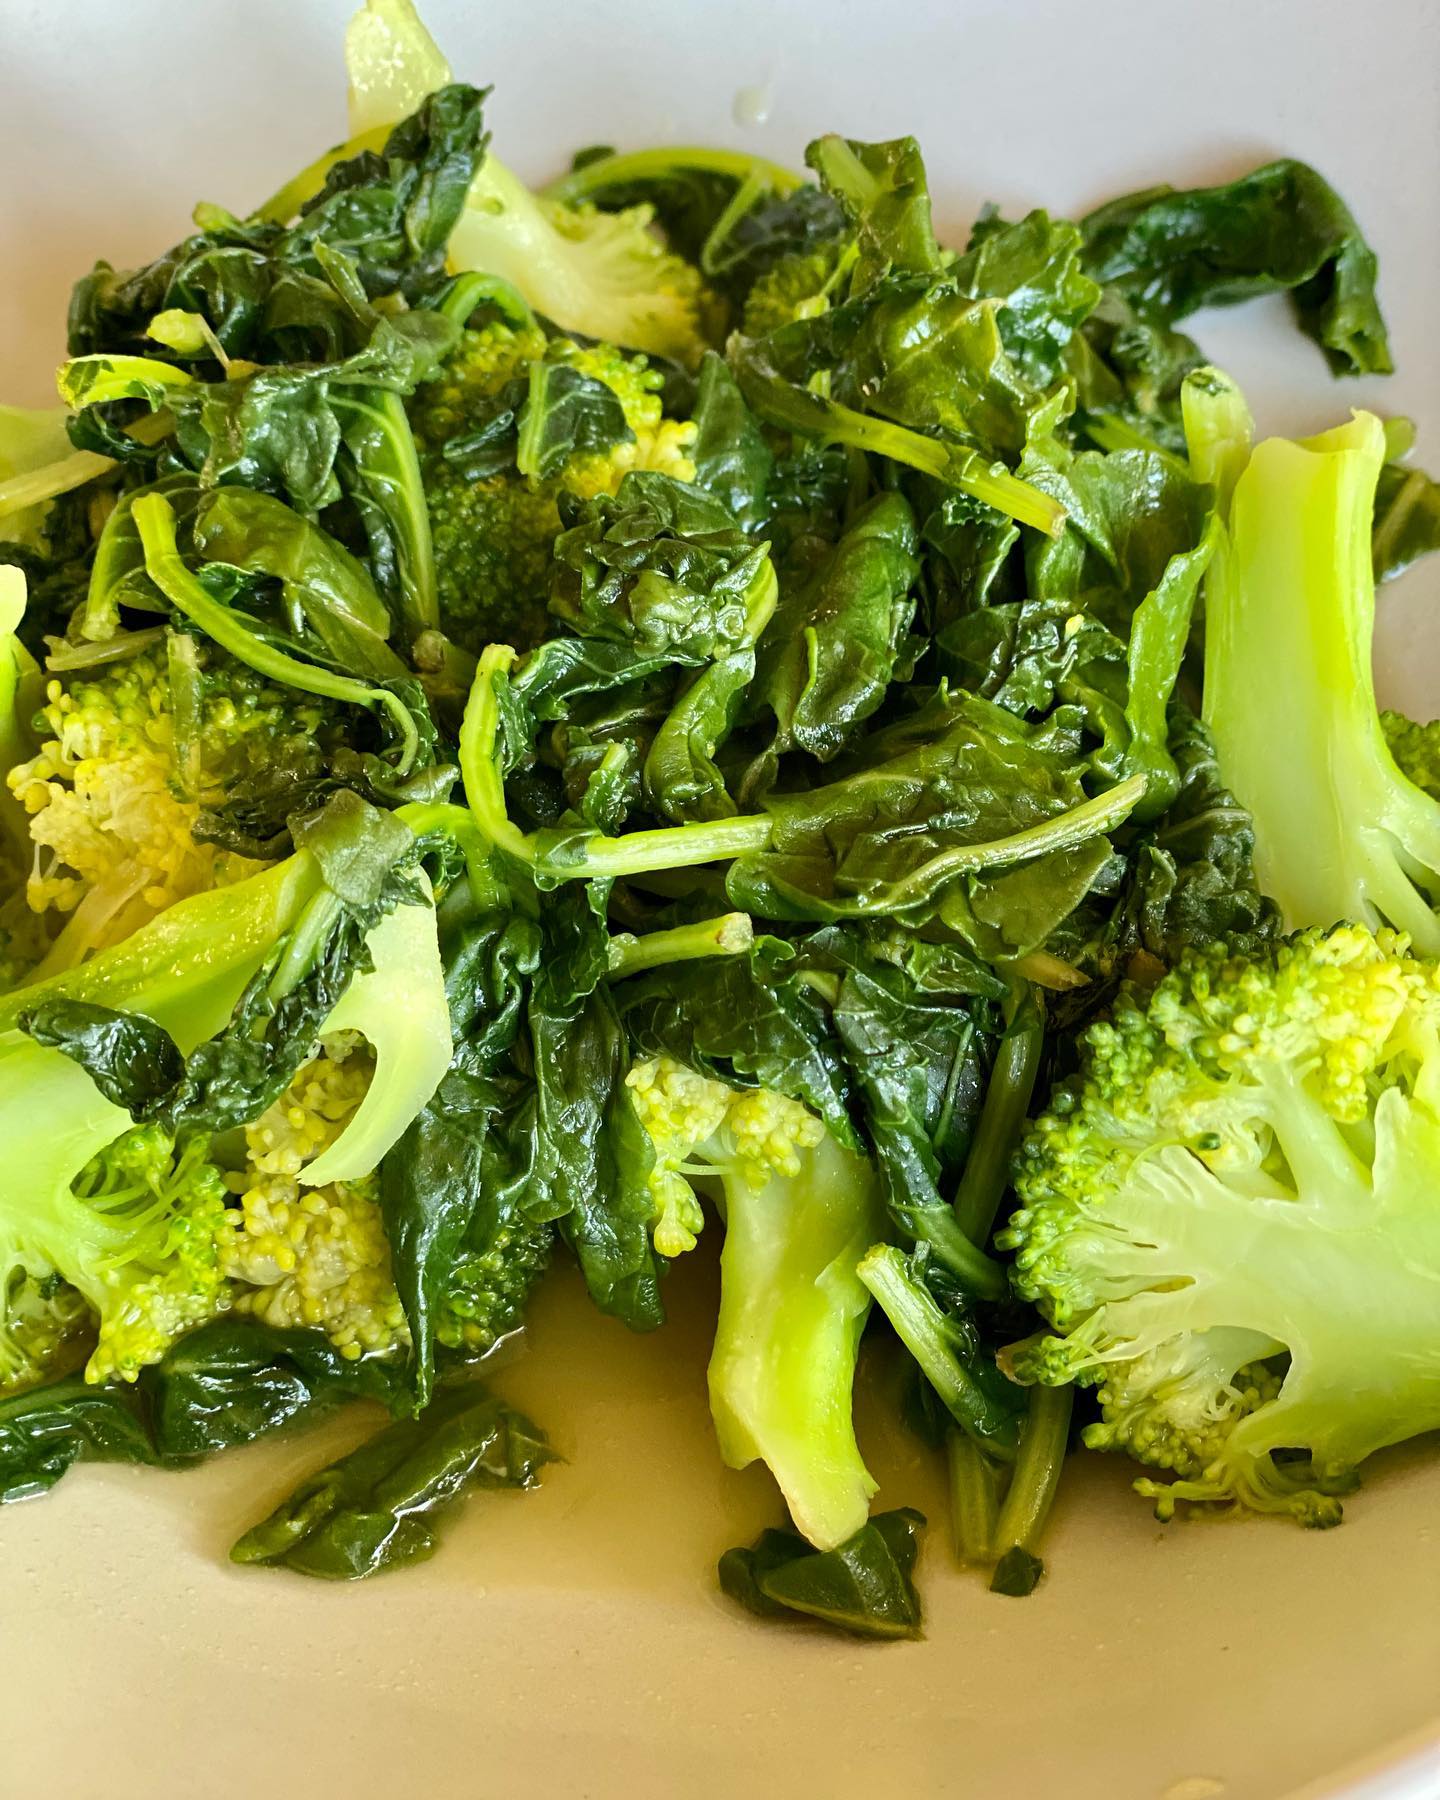 Steamed baby kale leaves and broccoli